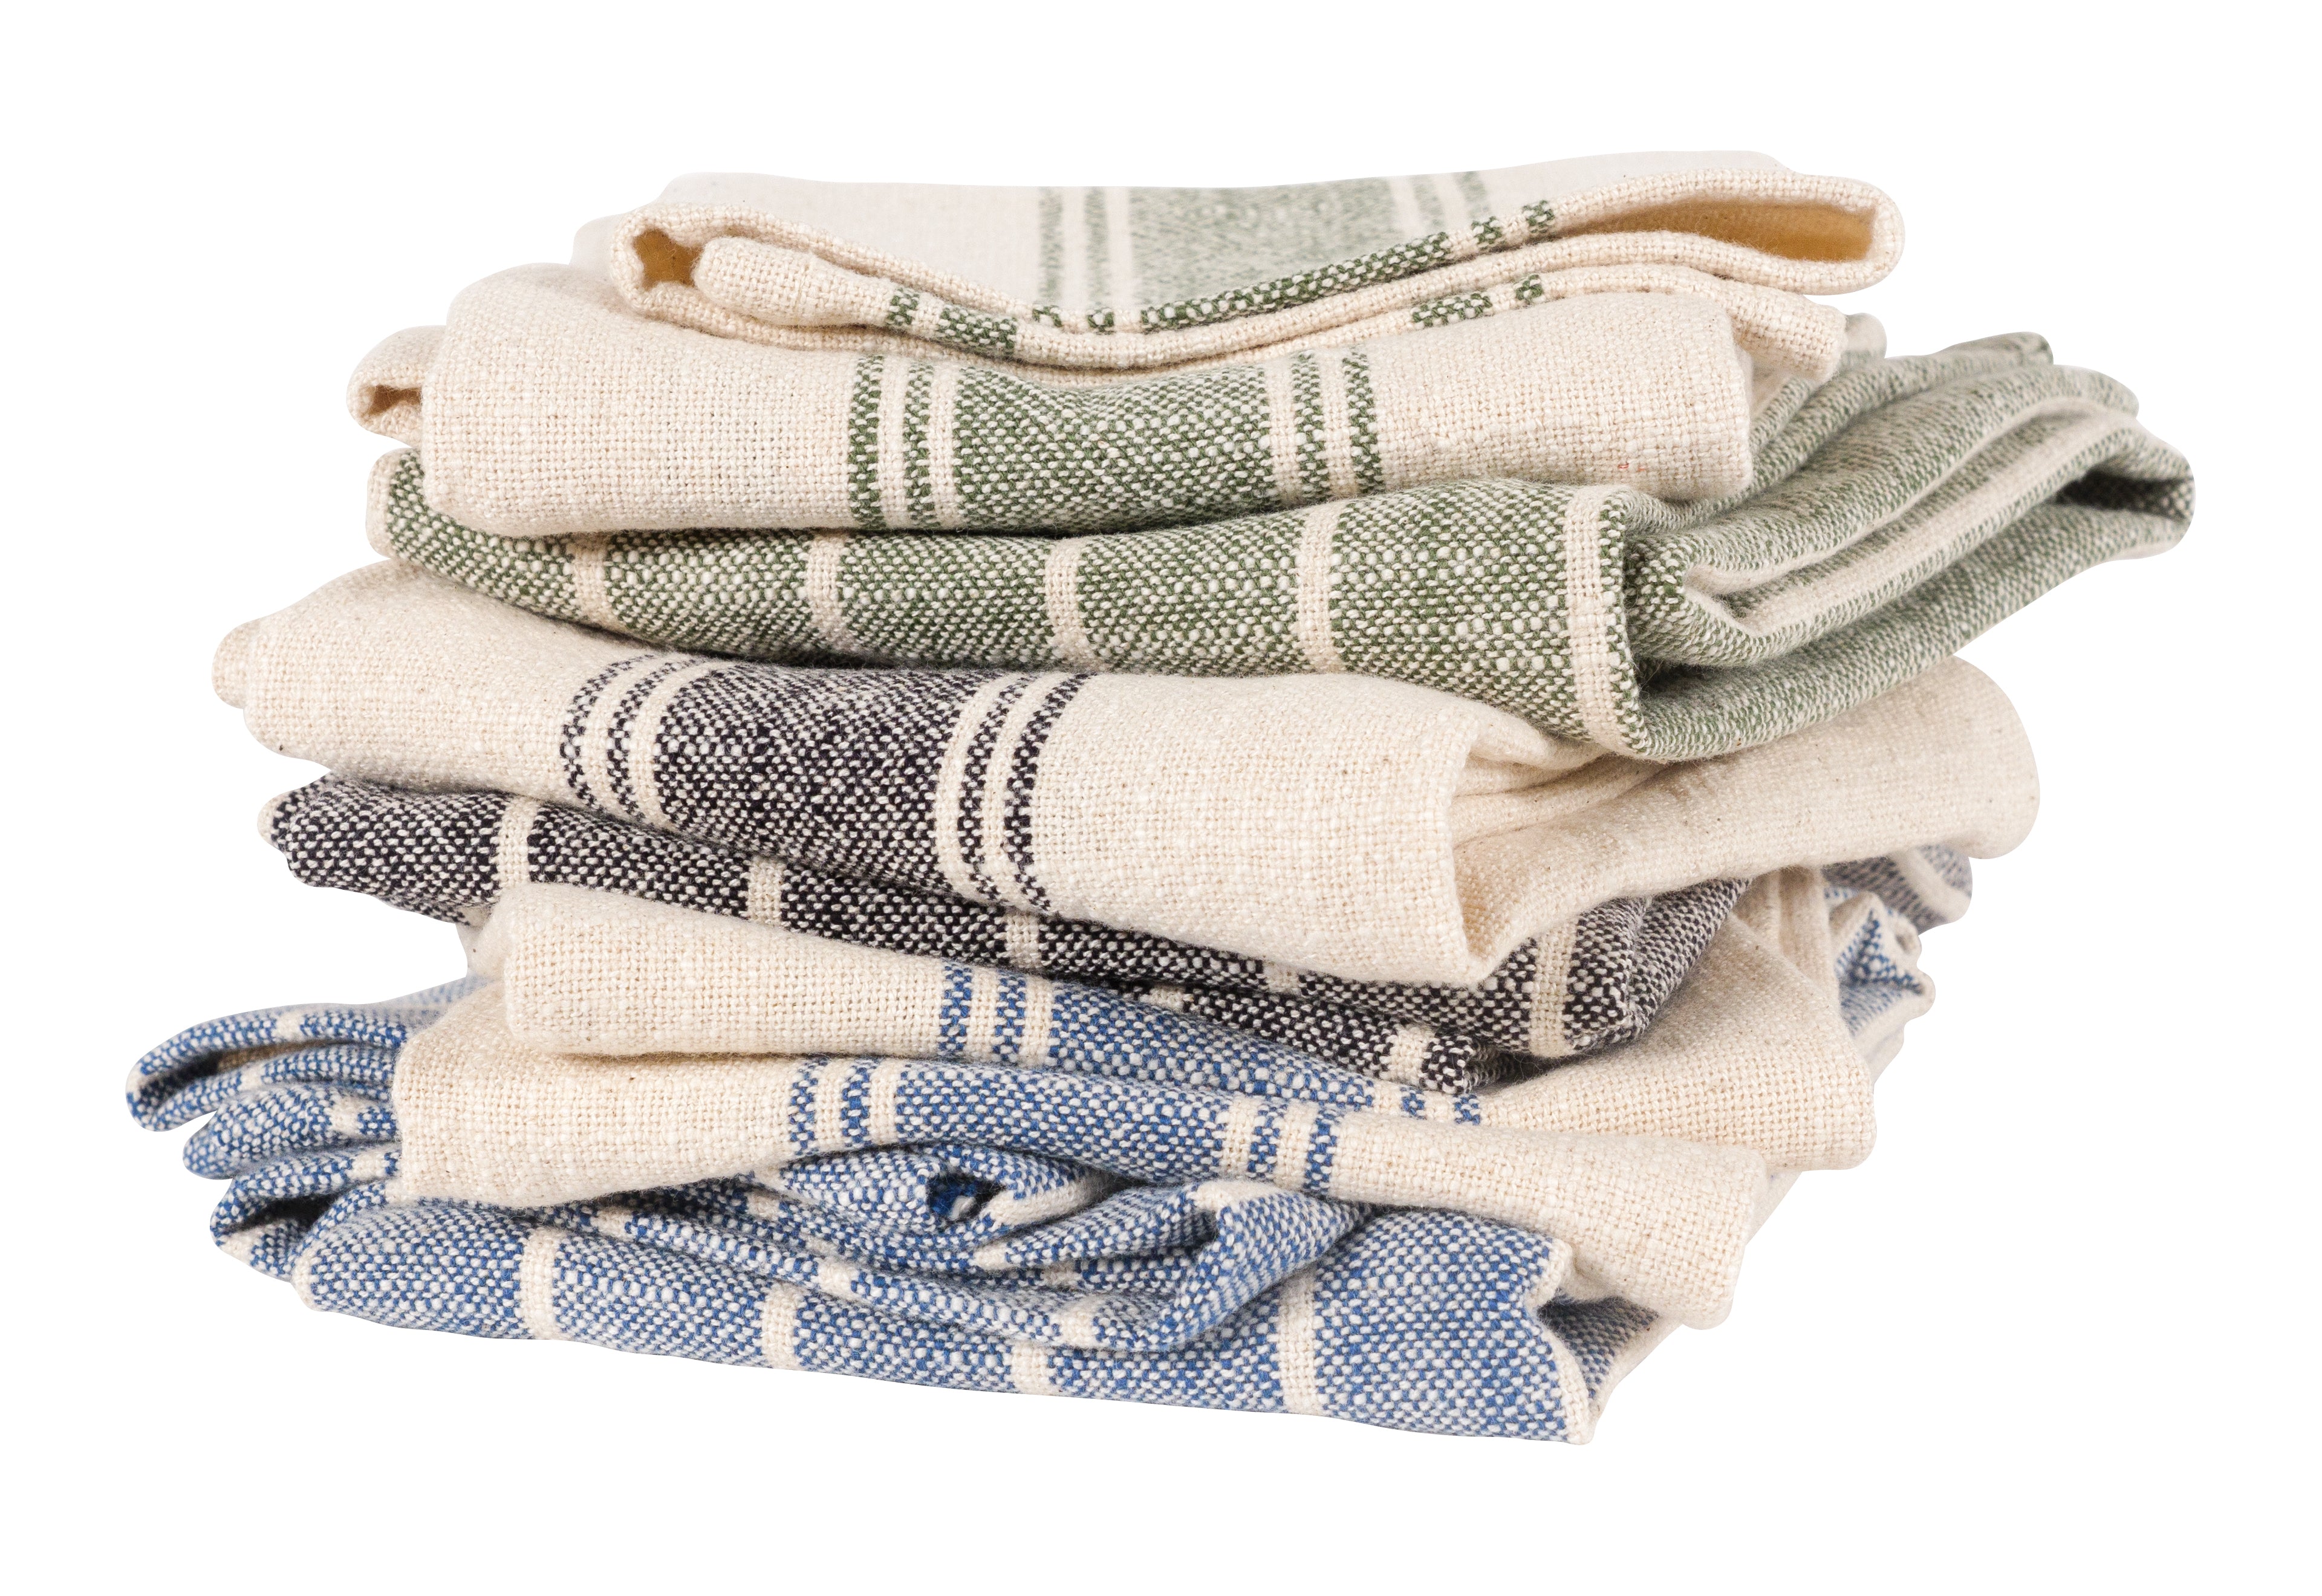 KAF Home Classic Farmhouse Stripe Kitchen Towels | Set of 12, 15 inch x 25 inch, 100% Pure Cotton Dish Towels | Perfect Bar Towel Dish Cloths for